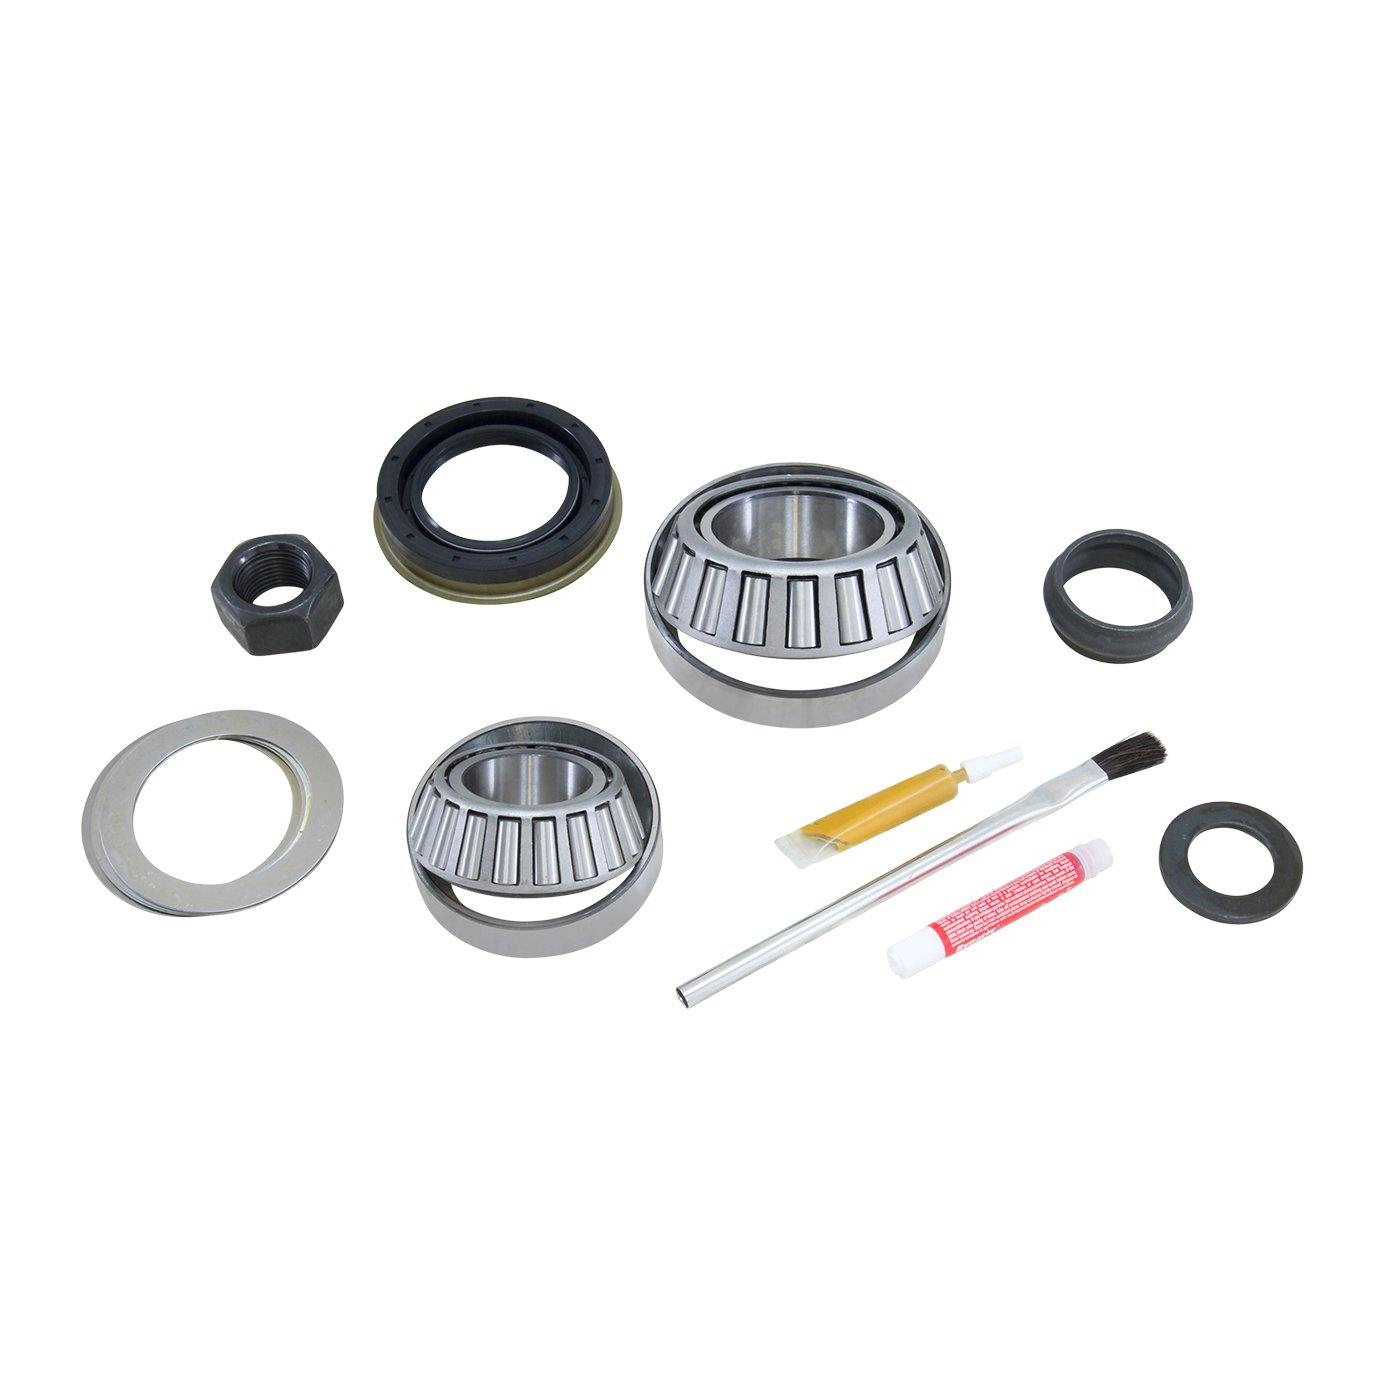 Pinion Install Kit For Dodge Dana 44 Front Differential W/ Disconnect